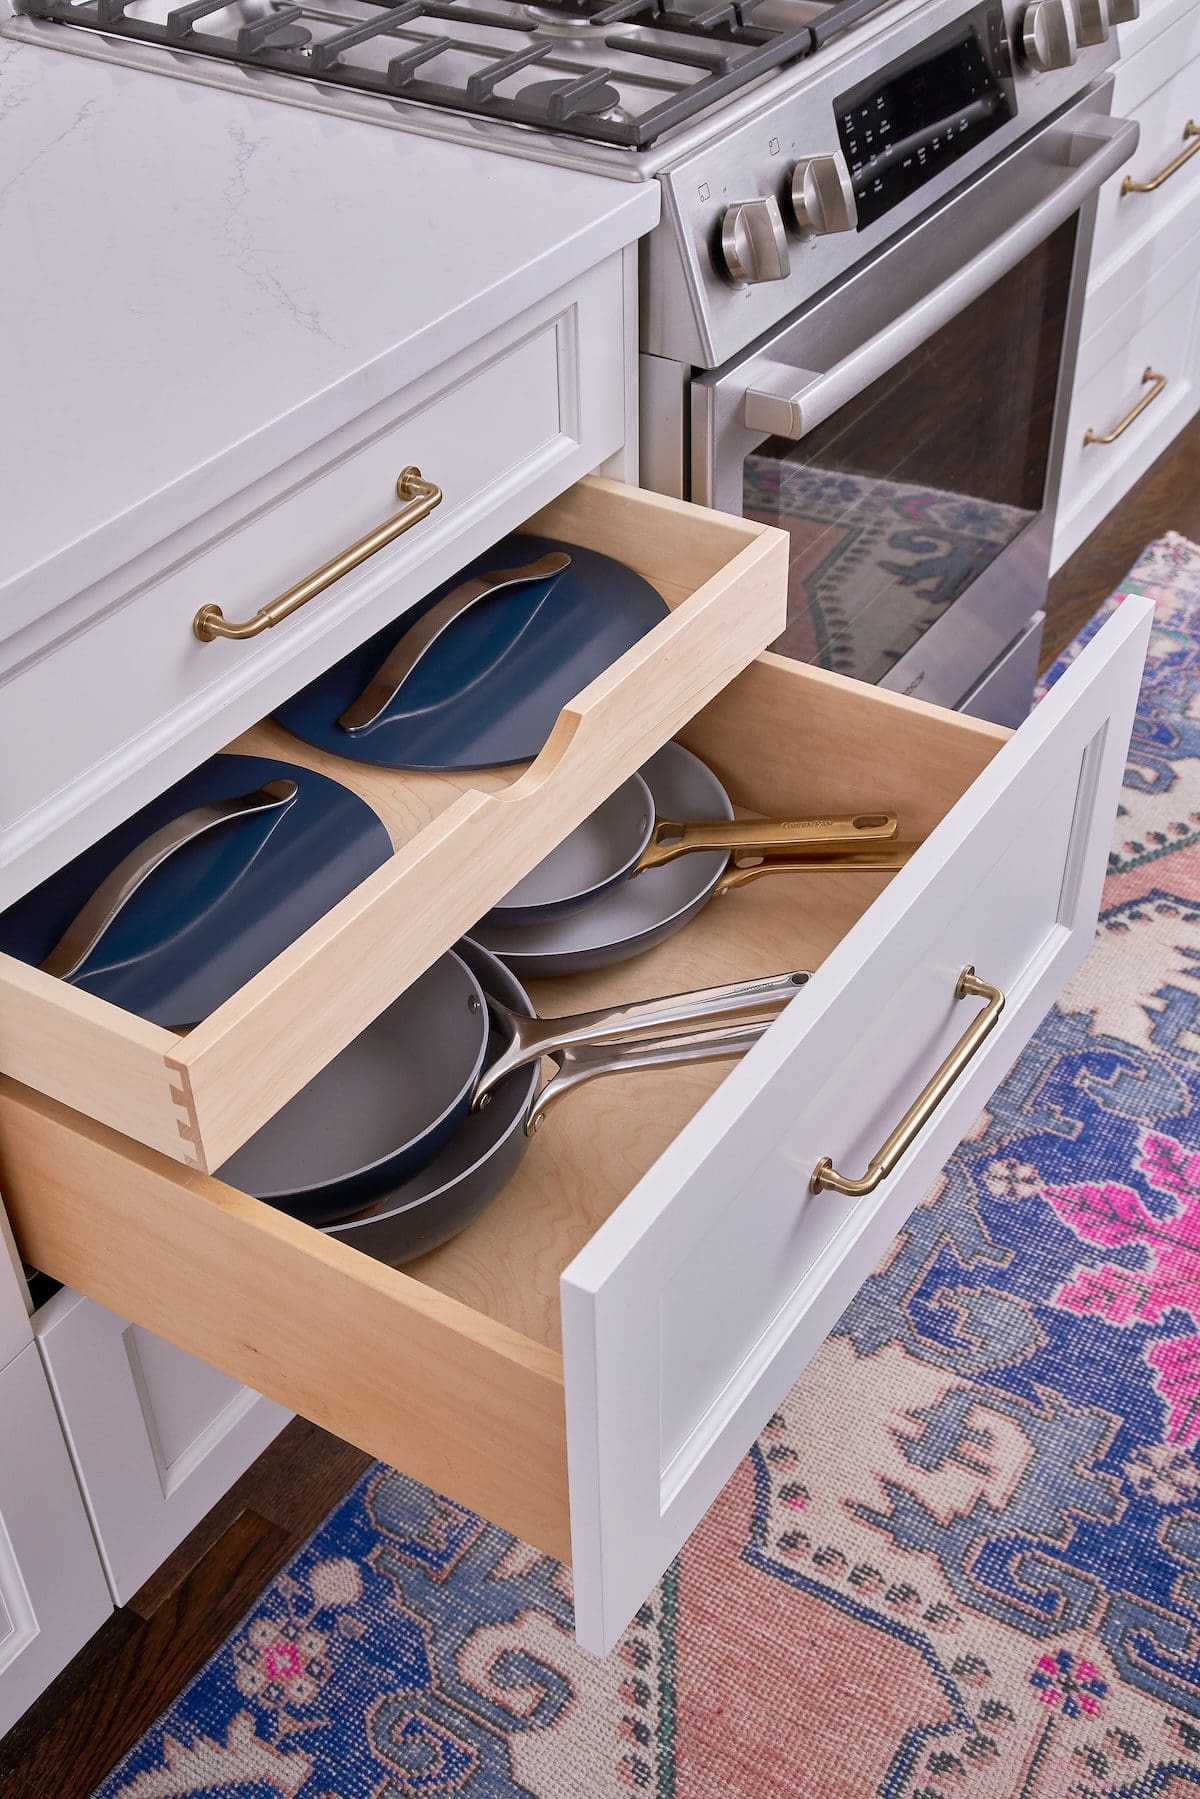 Kitchen drawers with pots and pans.